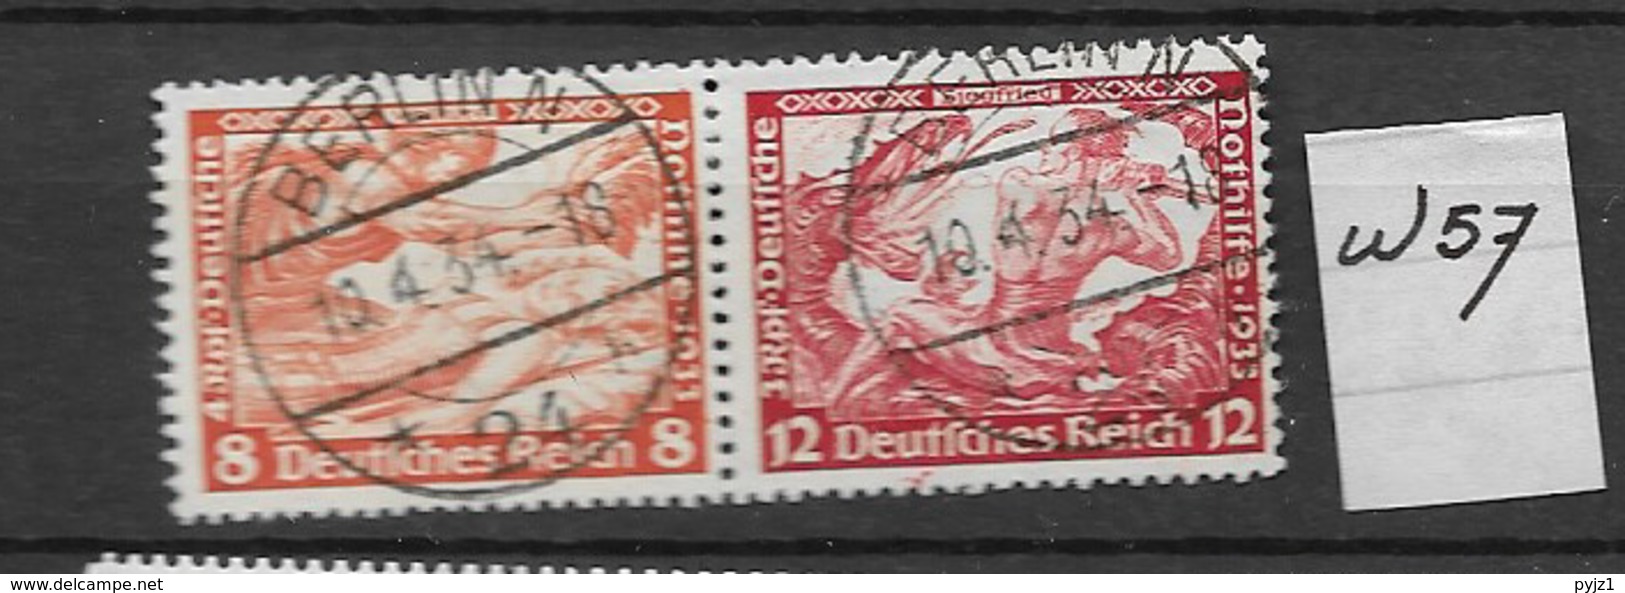 1933 USED Germany, Wagner, W57 - Se-Tenant